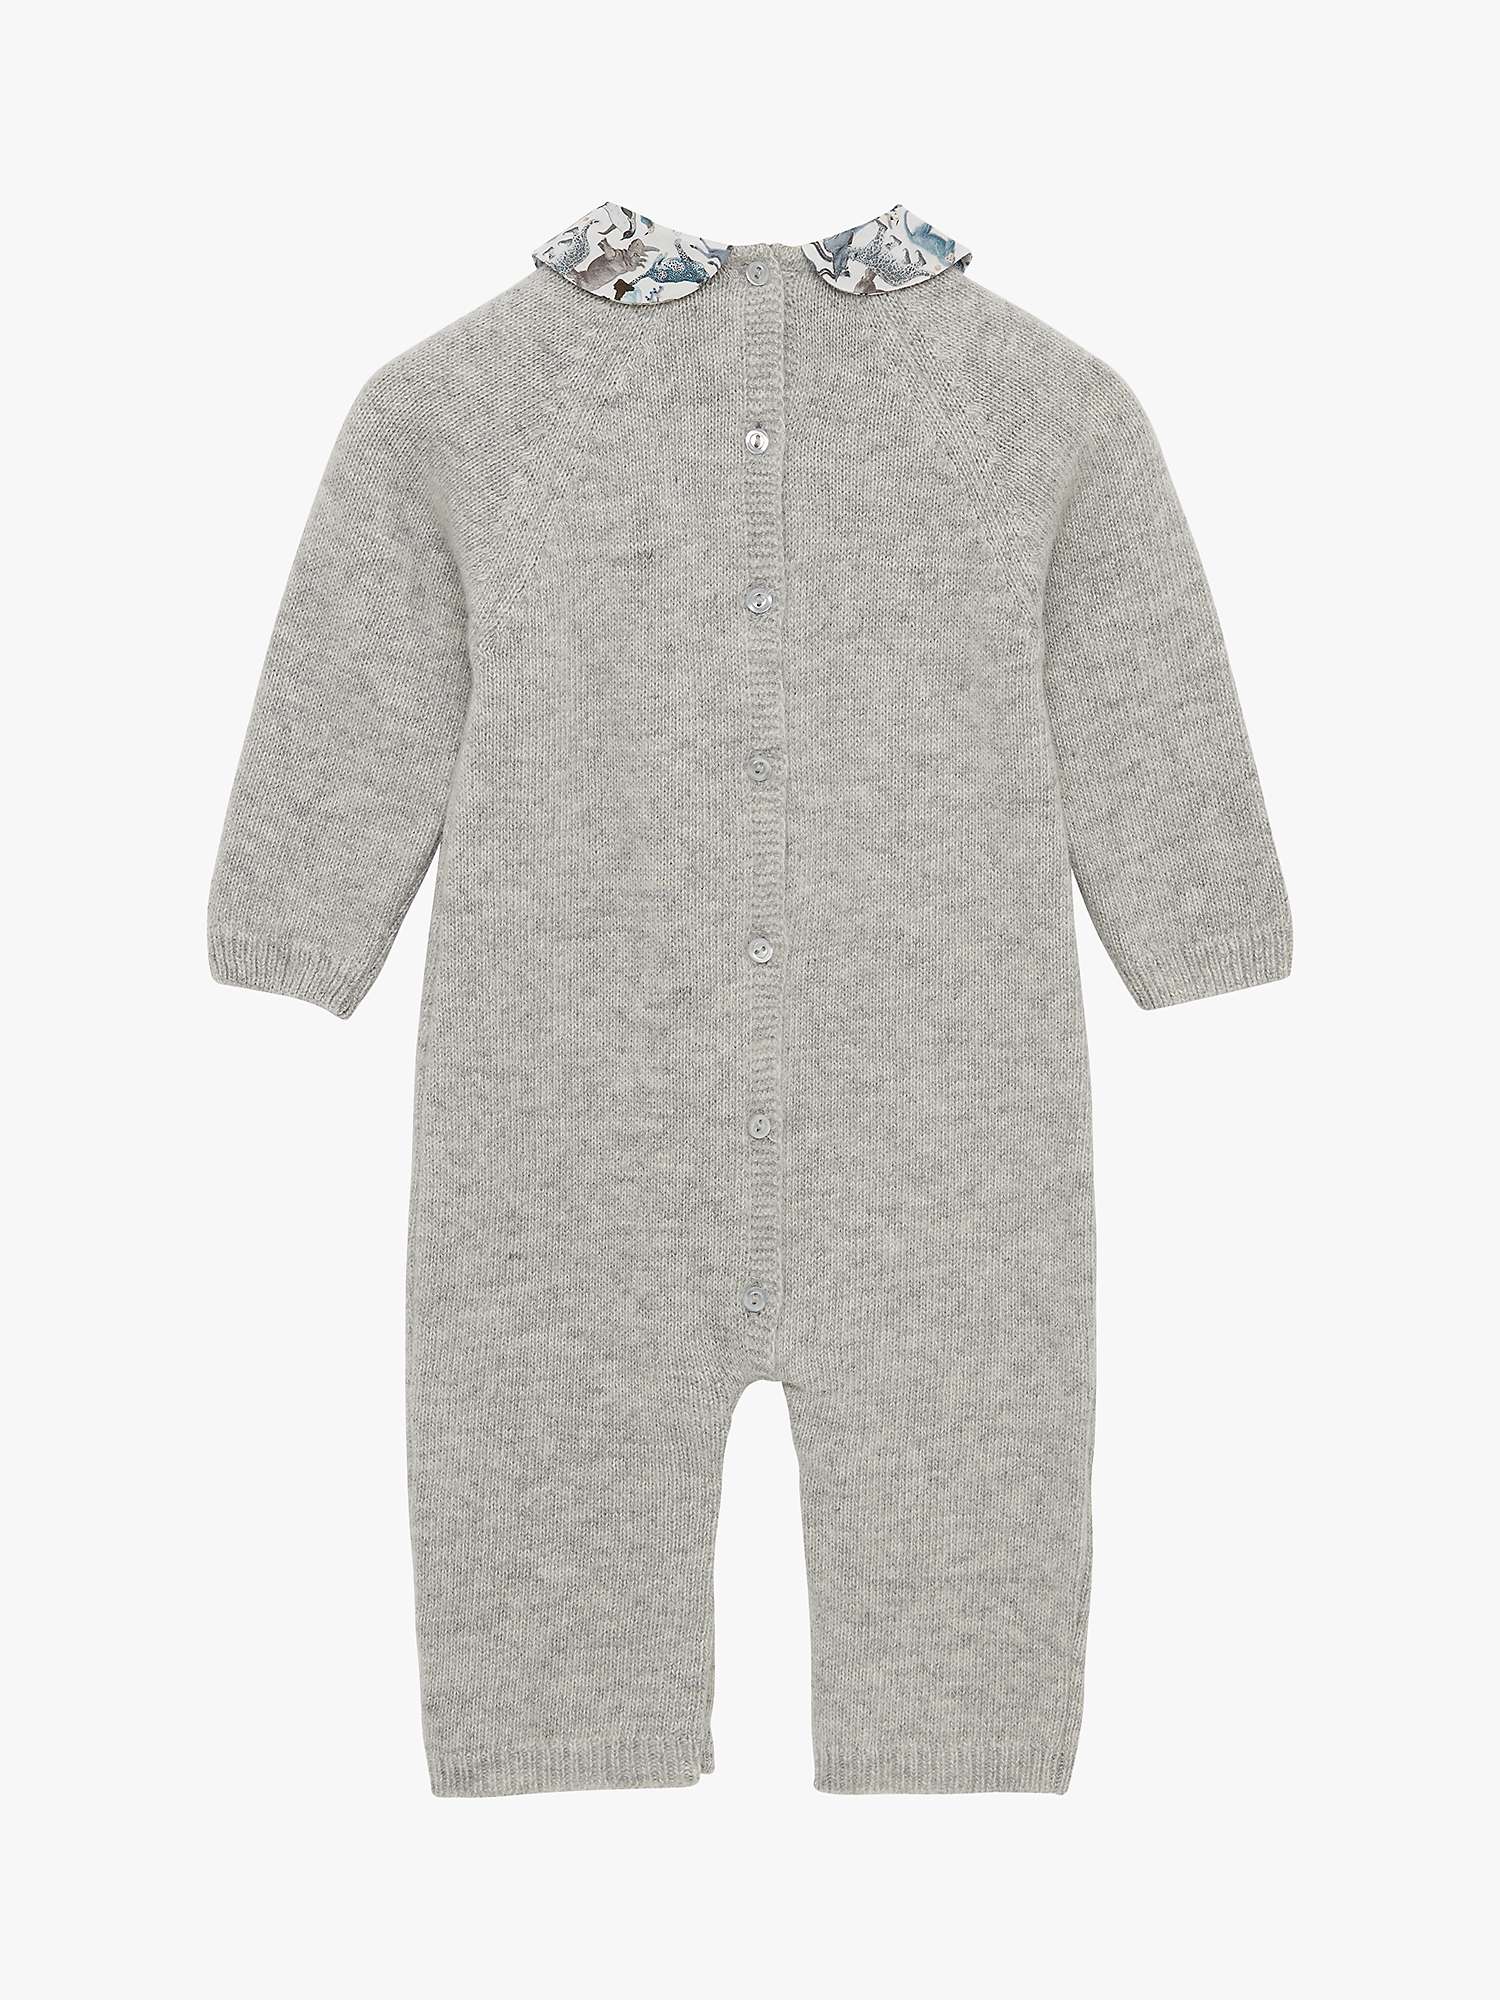 Buy Trotters Baby Liberty Print Queue For The Zoo All-In-One, Grey Online at johnlewis.com